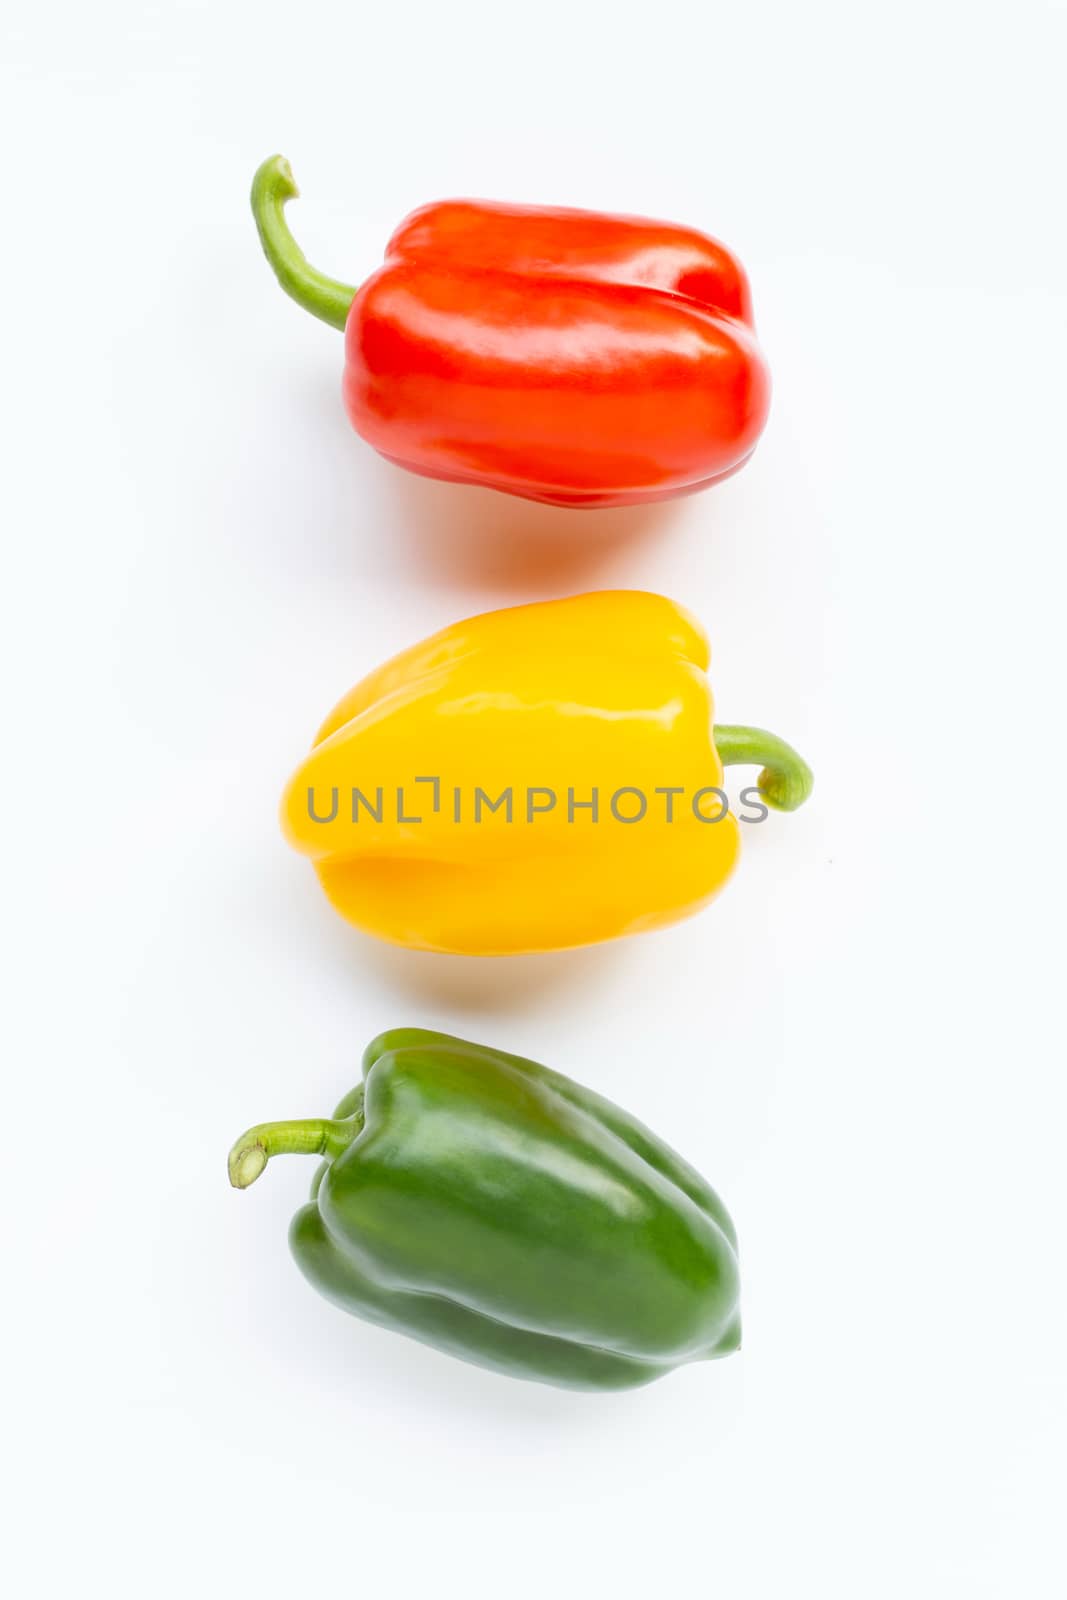 Green, yellow and red fresh bell pepper on white background.